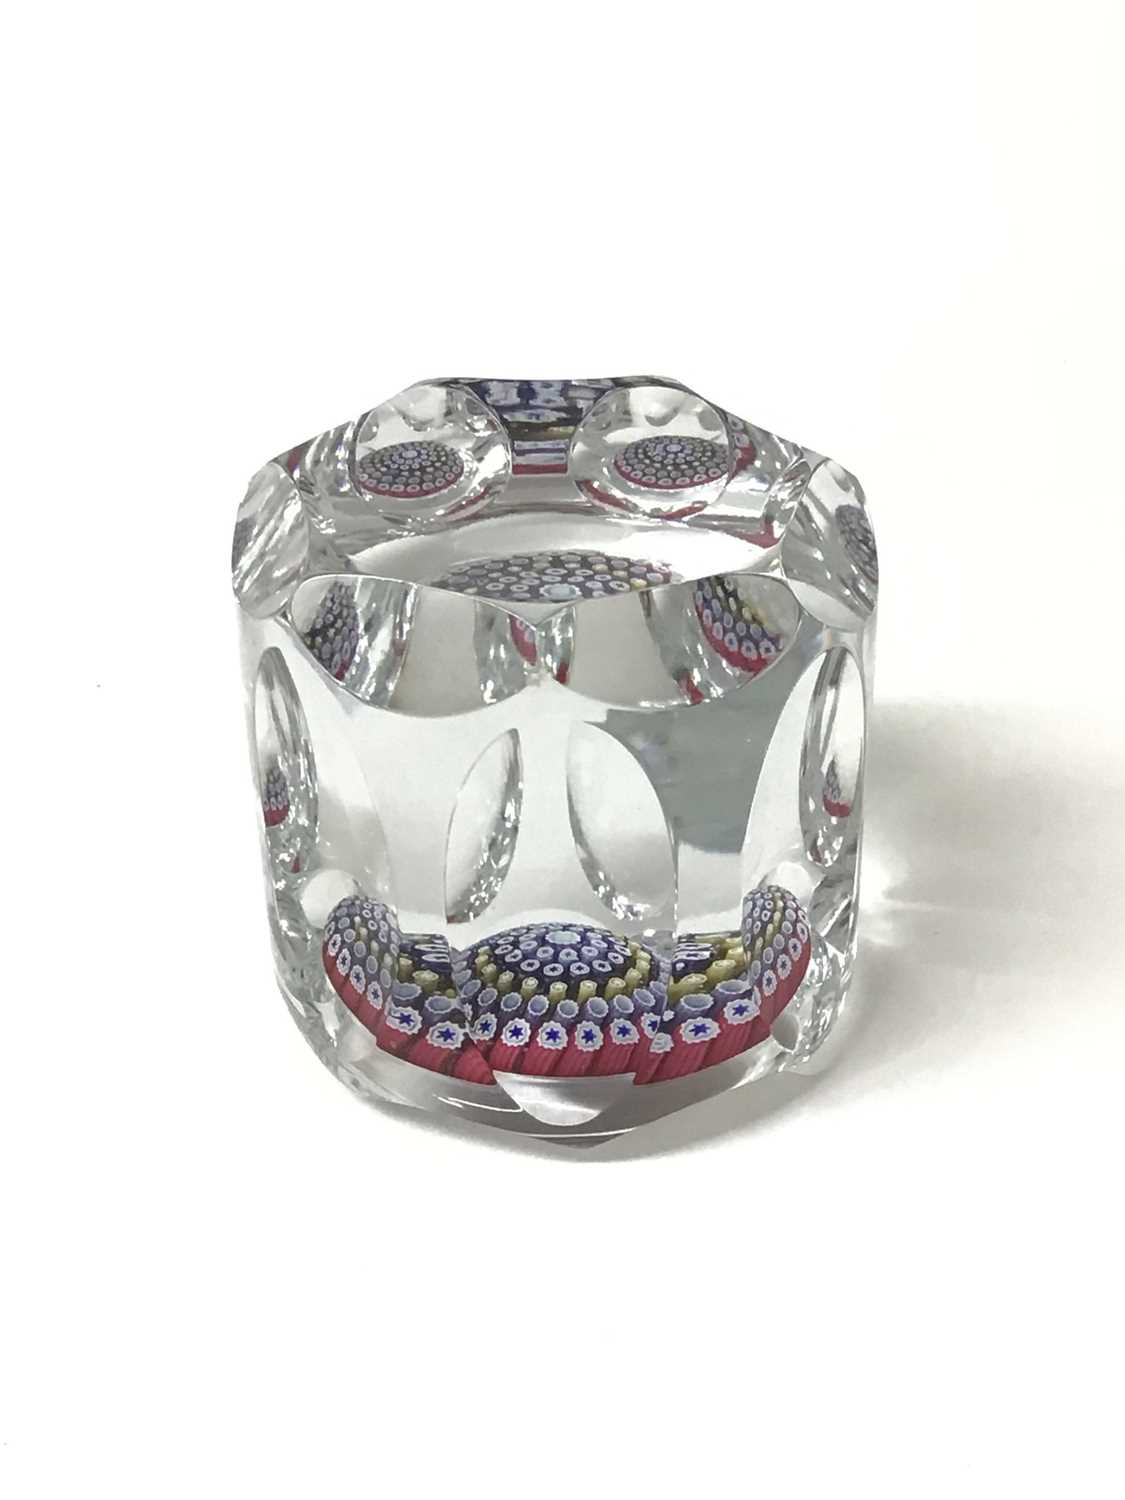 Lot 106 - Facet cut paperweight with millefiori decoration, dated 1974 - possibly Whitefriars